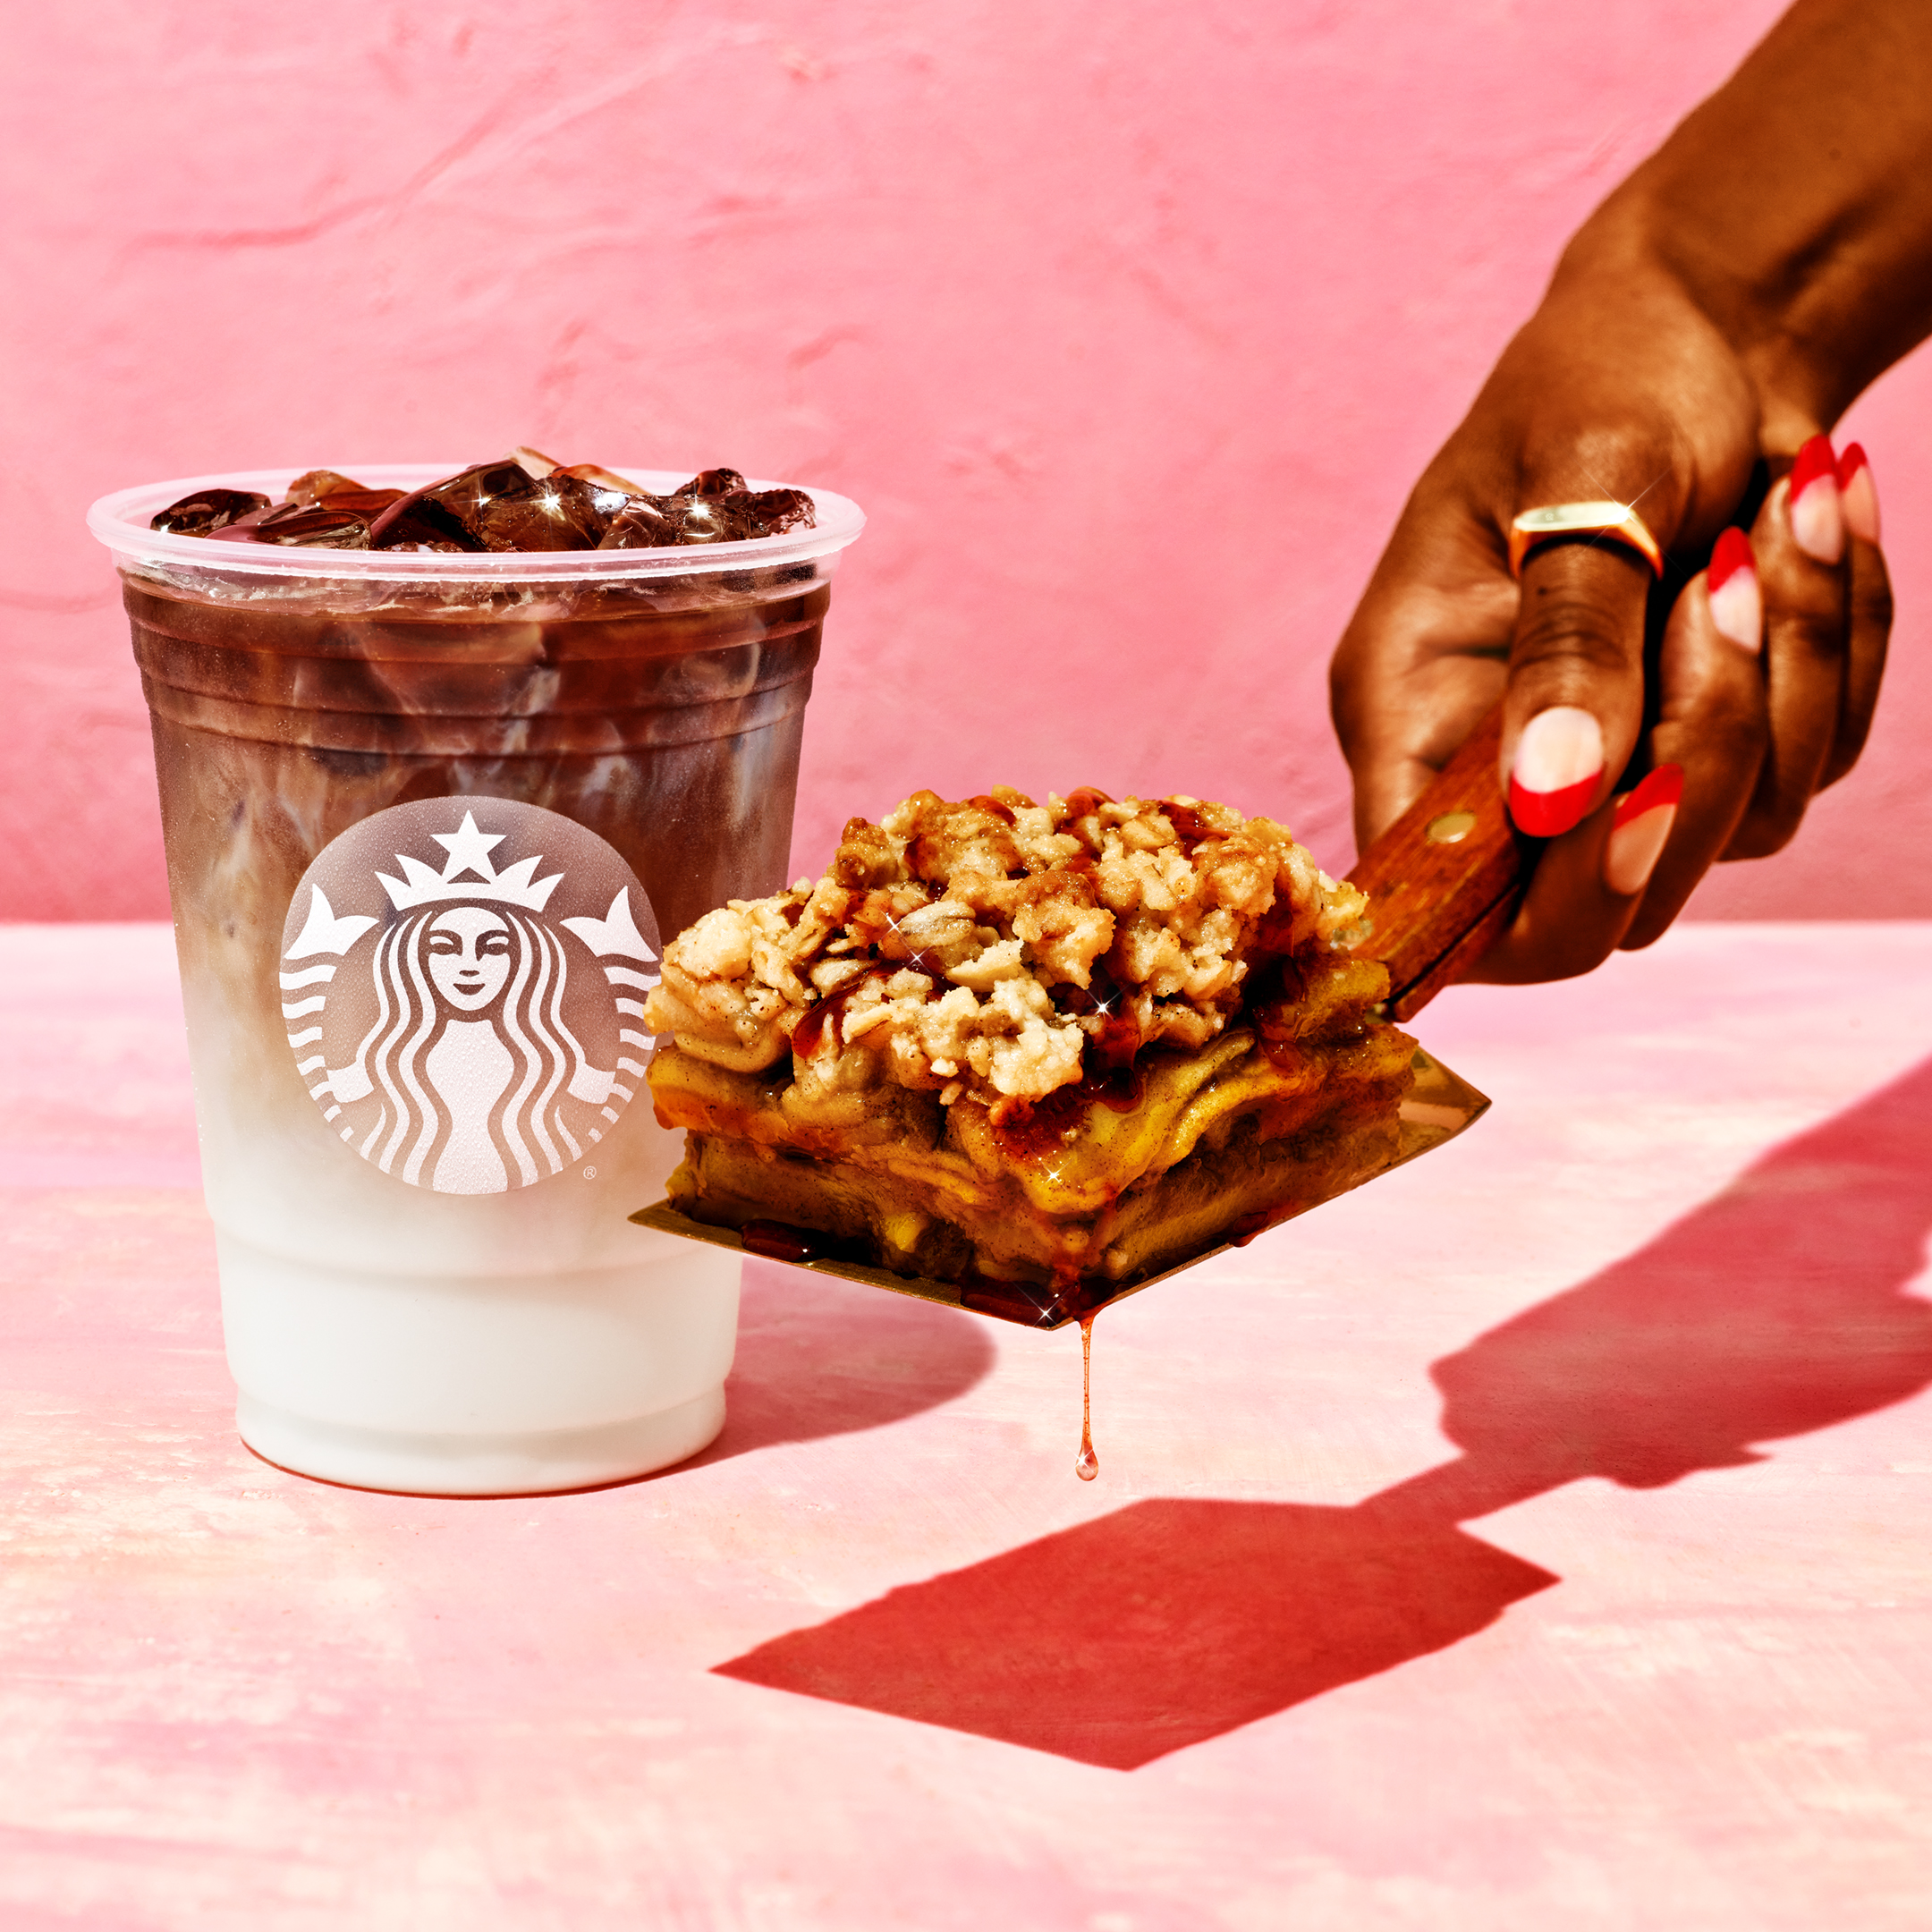 A plastic cup with a white and brown layered starbucks drink in the background. In the foreground, a manicured hand holding a spatula with a slice of crisp